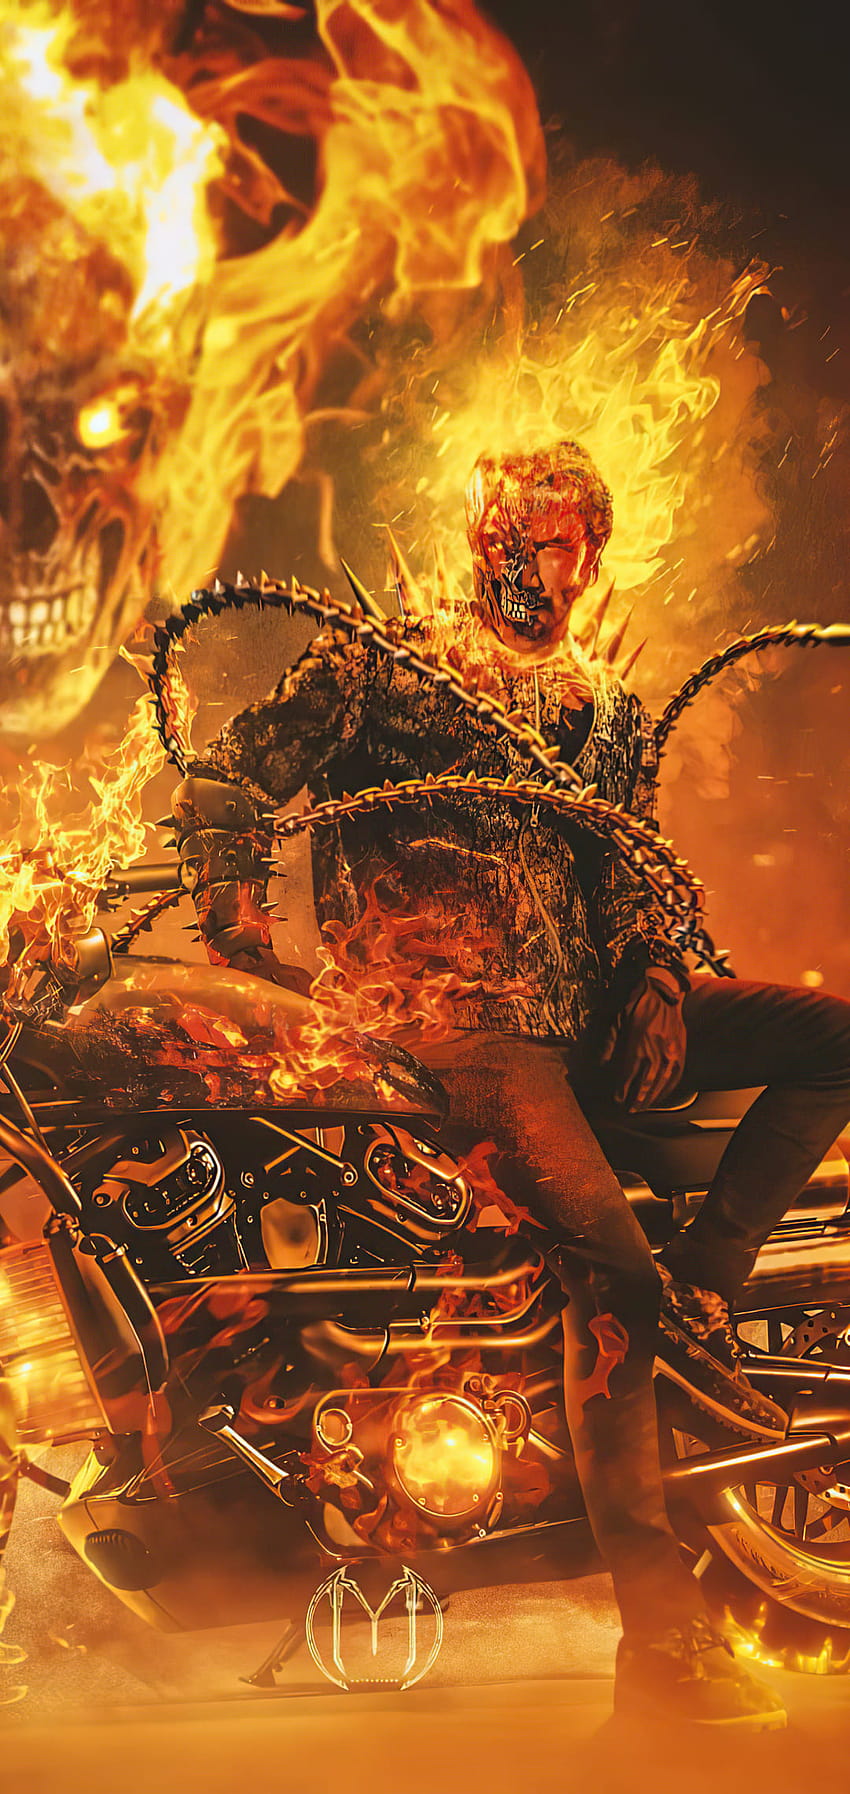 Ghost rider hd wallpapers, hd images, backgrounds